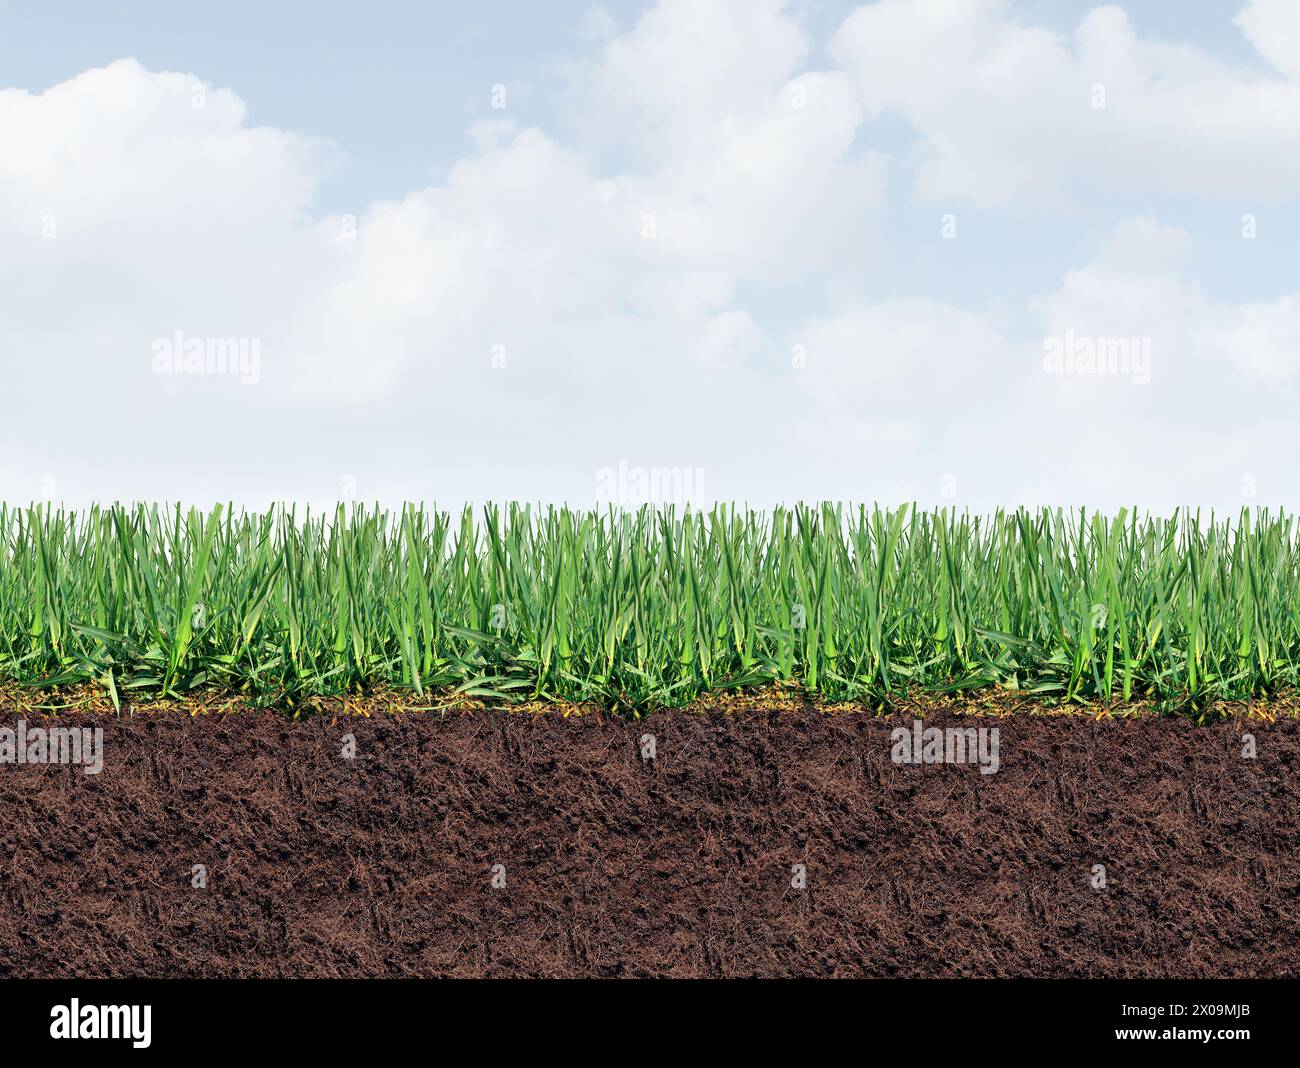 Healthy Lawn Border Background as a Perfect turf and healthy grass with good lawncare for controlling weeds and fertilizing and aerating a green yard Stock Photo